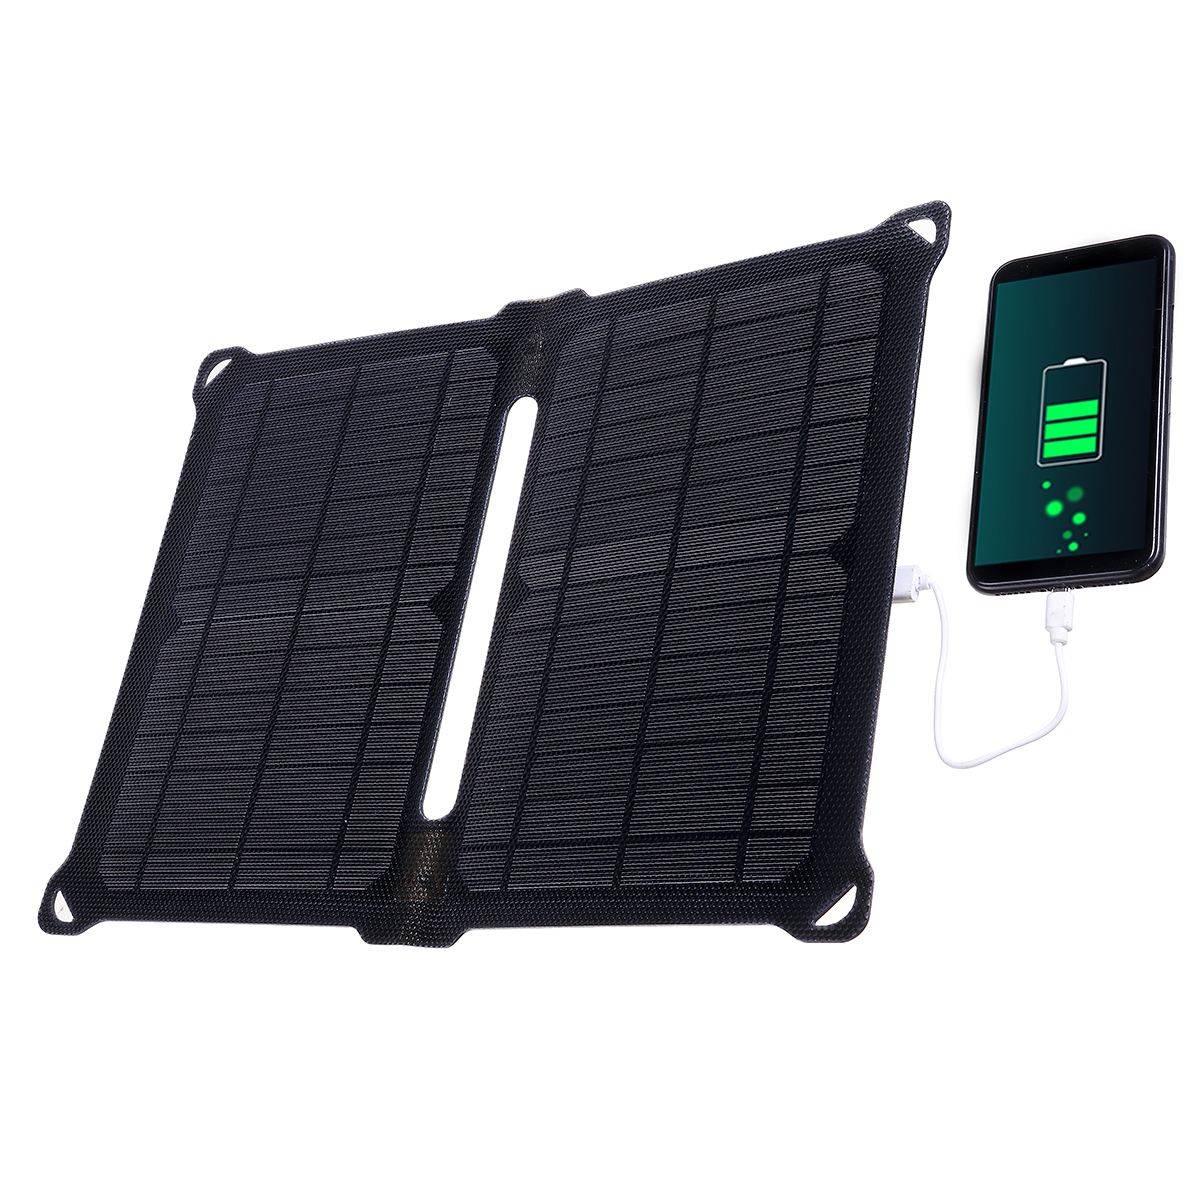 Foldable-Solar-Charger-Waterproof-ETFE-Monoctrystalline-Solar-Panel-Dual-USB-Ports-Outdoor-Camping-C-1935777-8